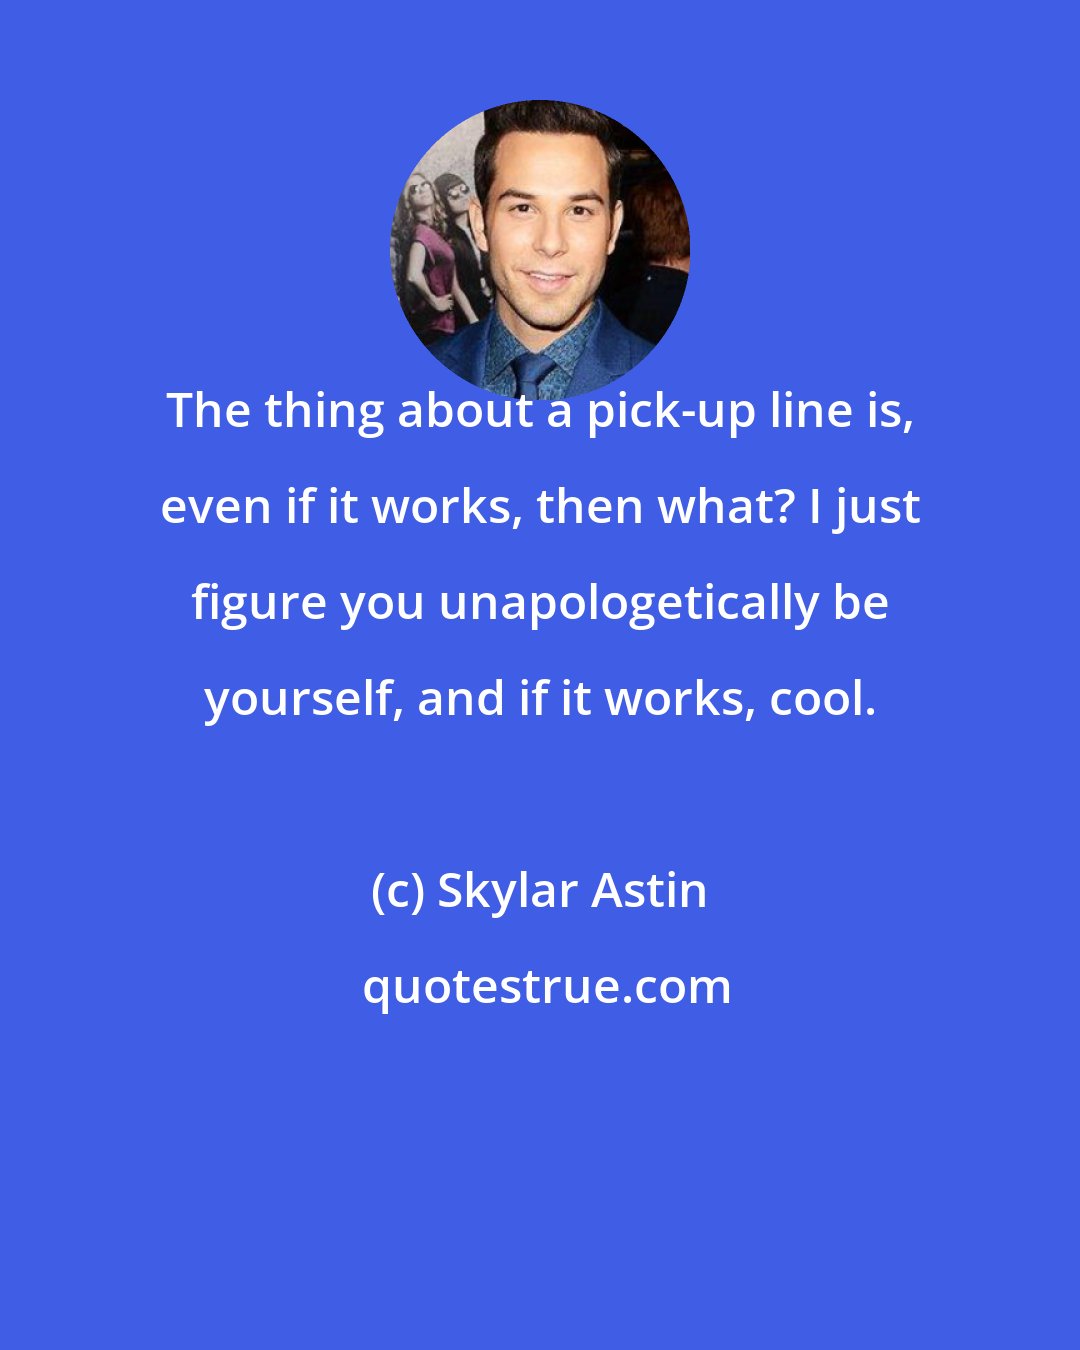 Skylar Astin: The thing about a pick-up line is, even if it works, then what? I just figure you unapologetically be yourself, and if it works, cool.